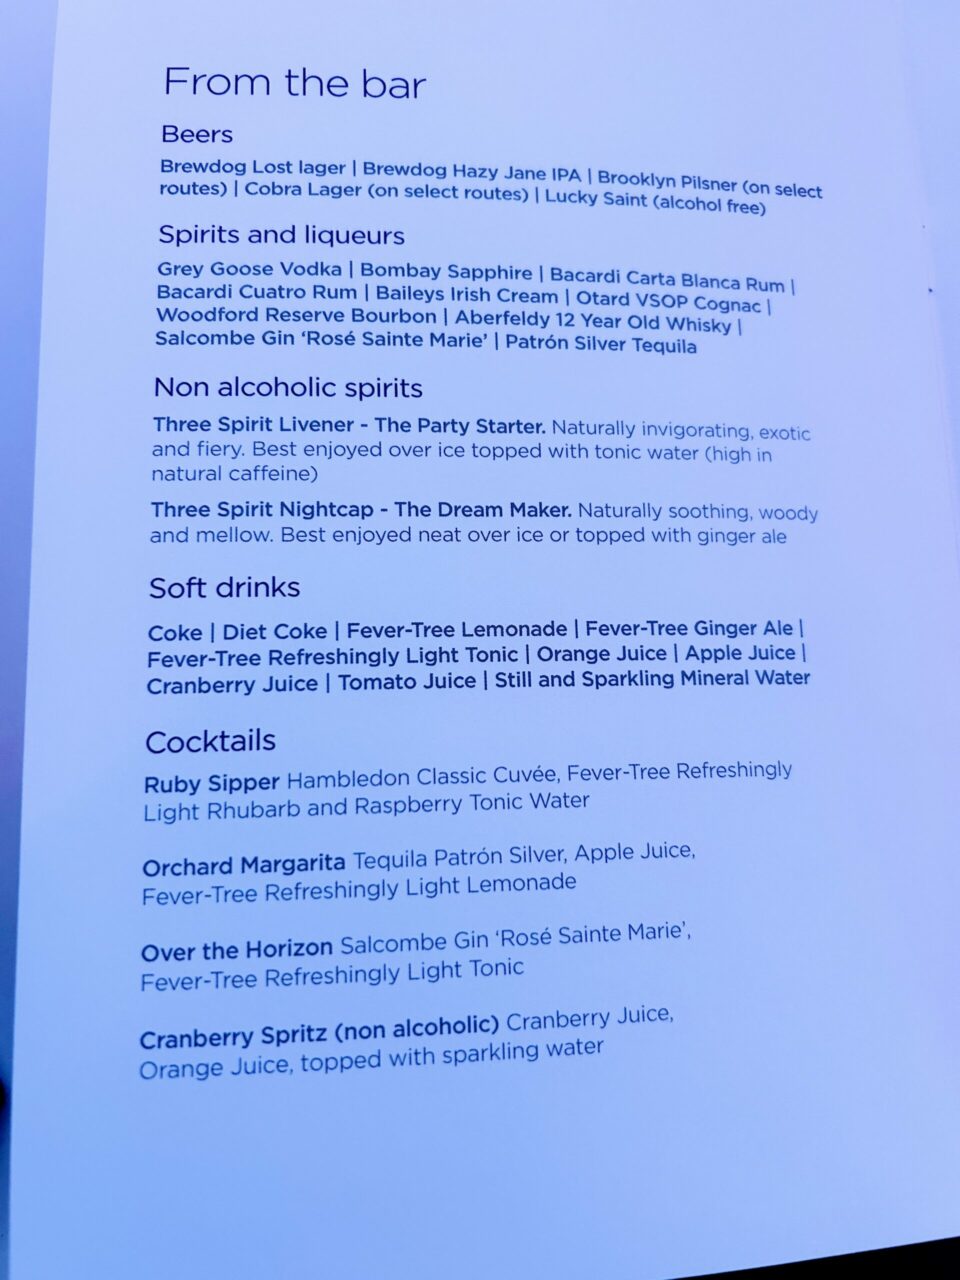 A330NEO Upper Class Suite - Menu and Drinks List